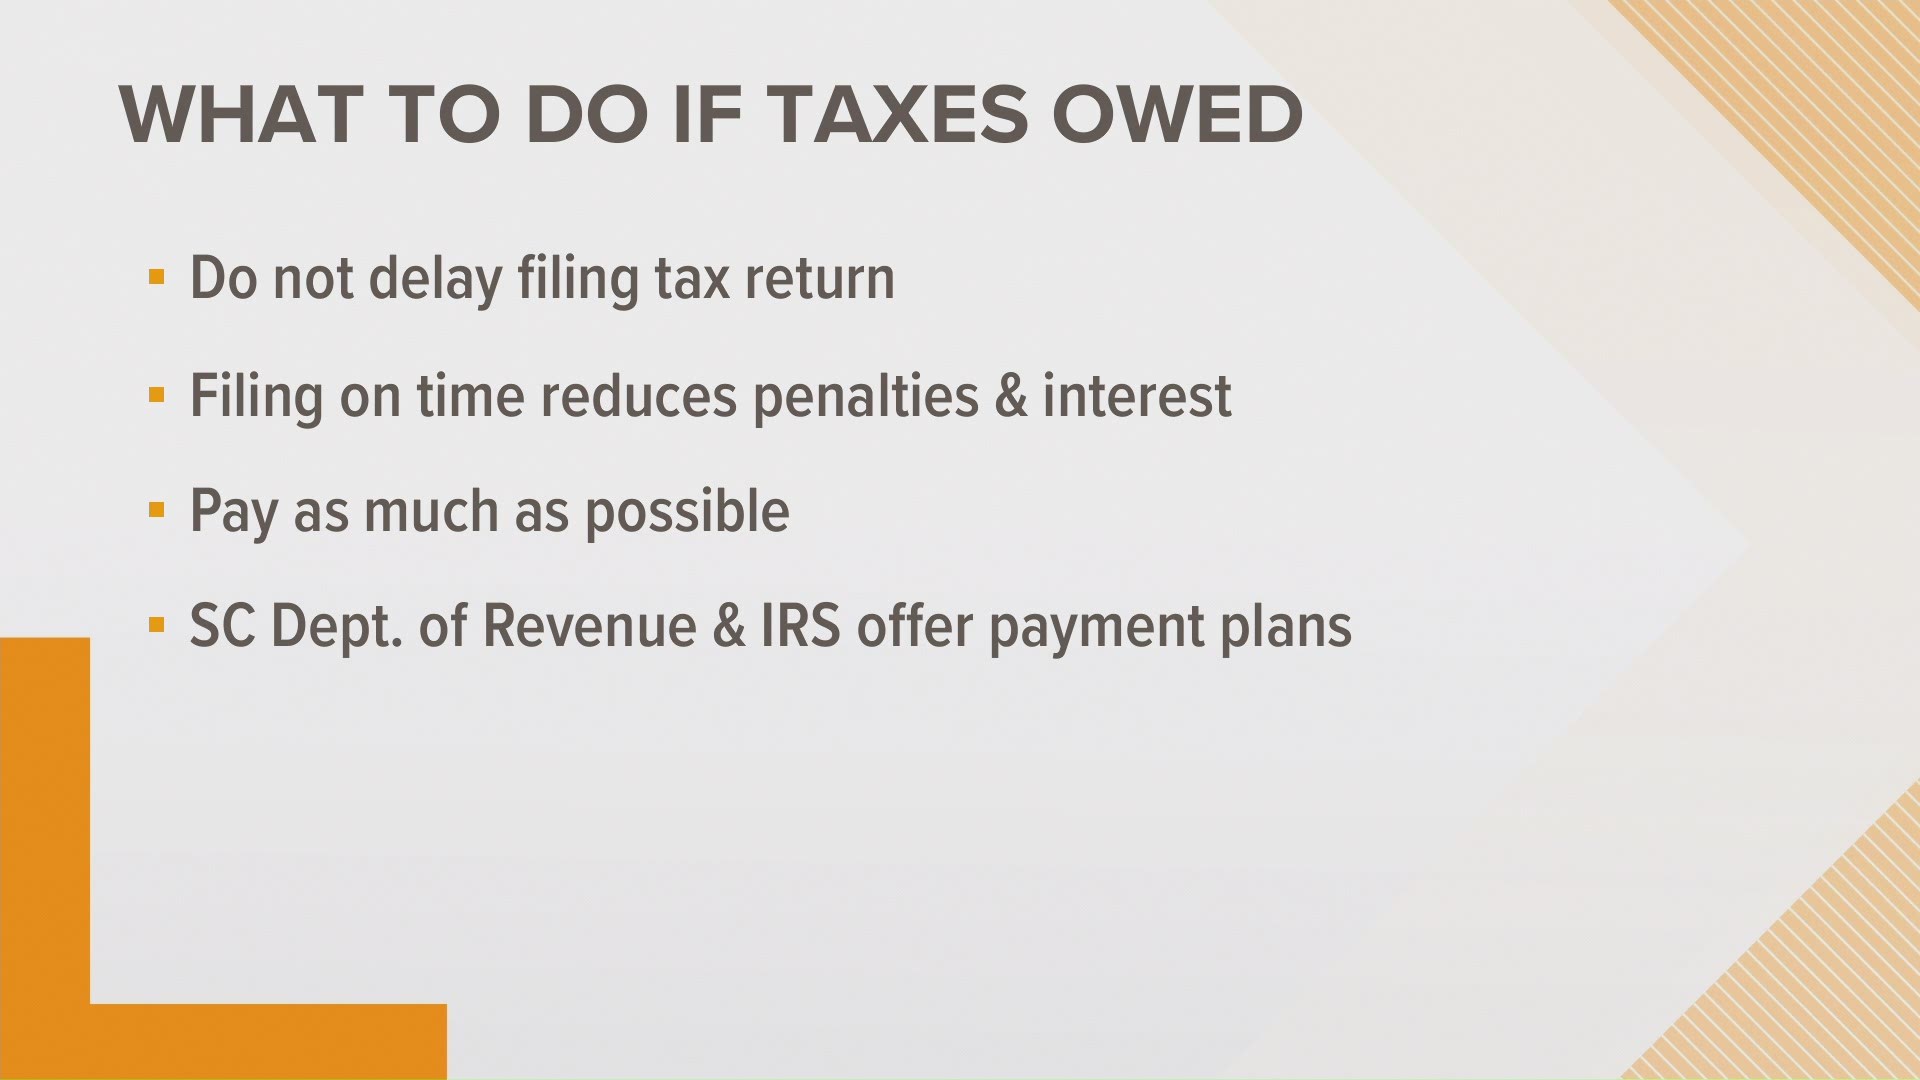 Tips and information for filing 2020 income taxes